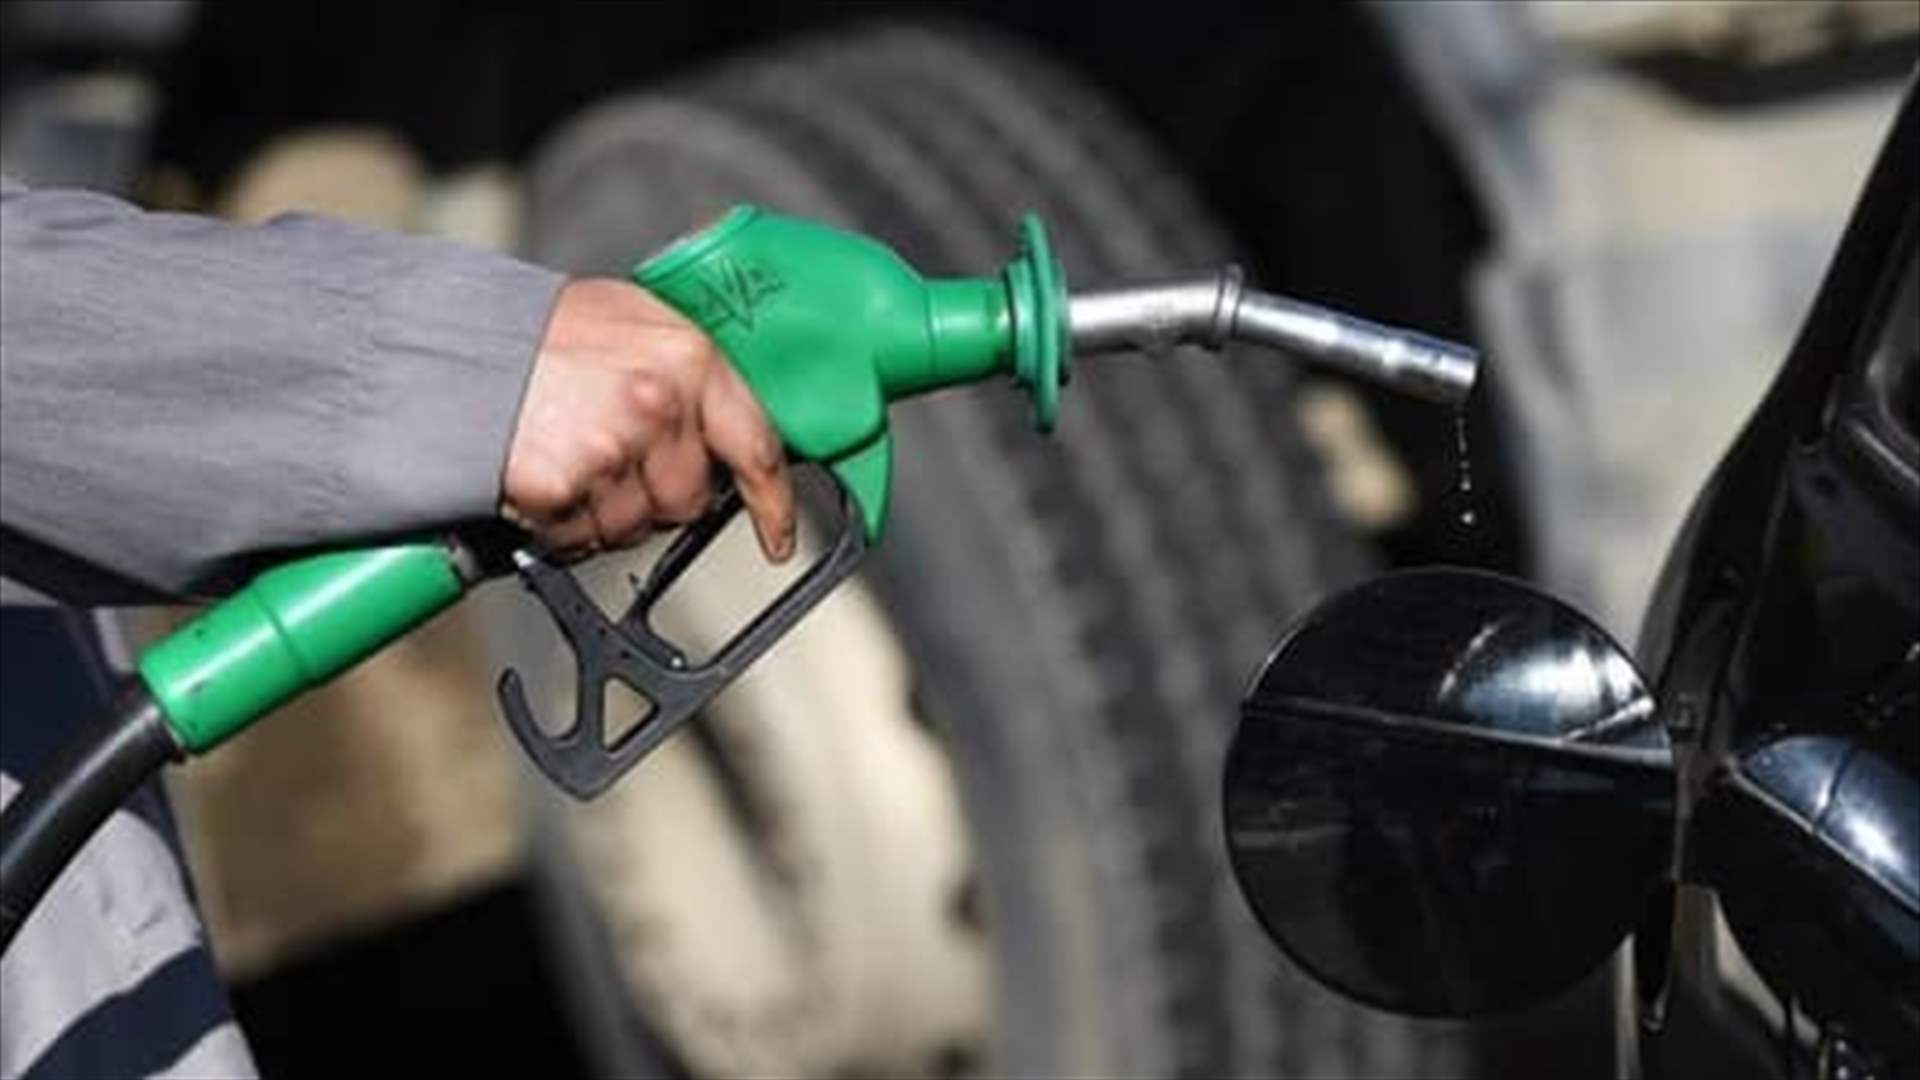 Price of gasoline increases by 6000 LBP